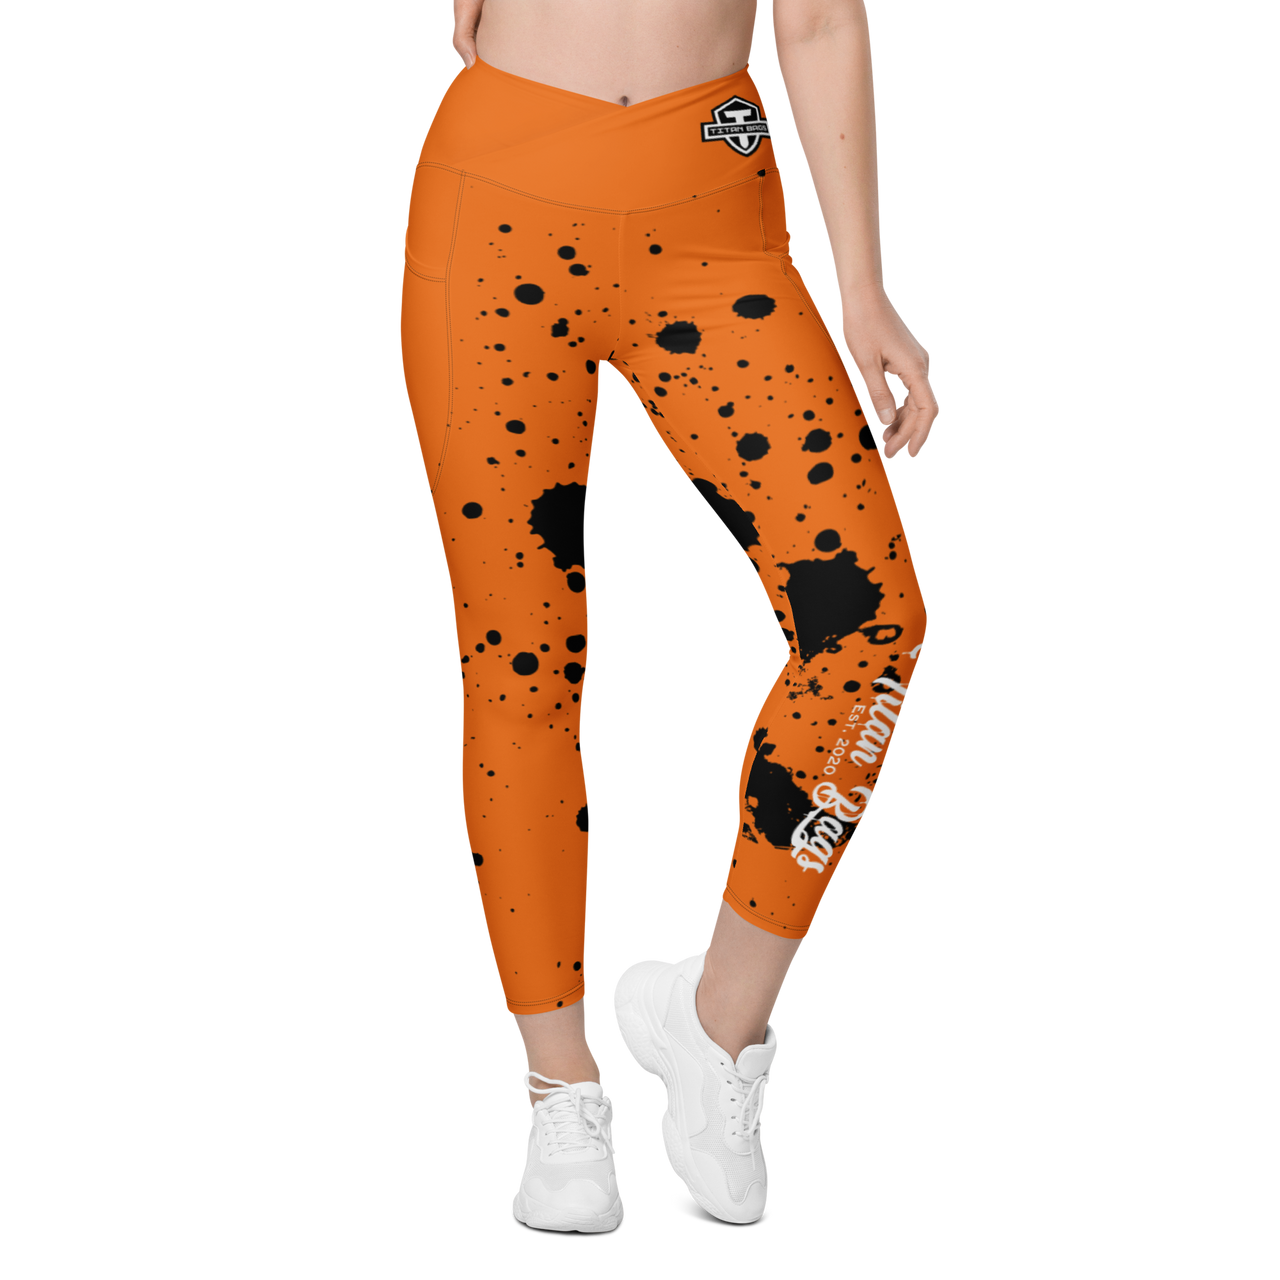 All-Over Print Crossover Leggings with Pockets